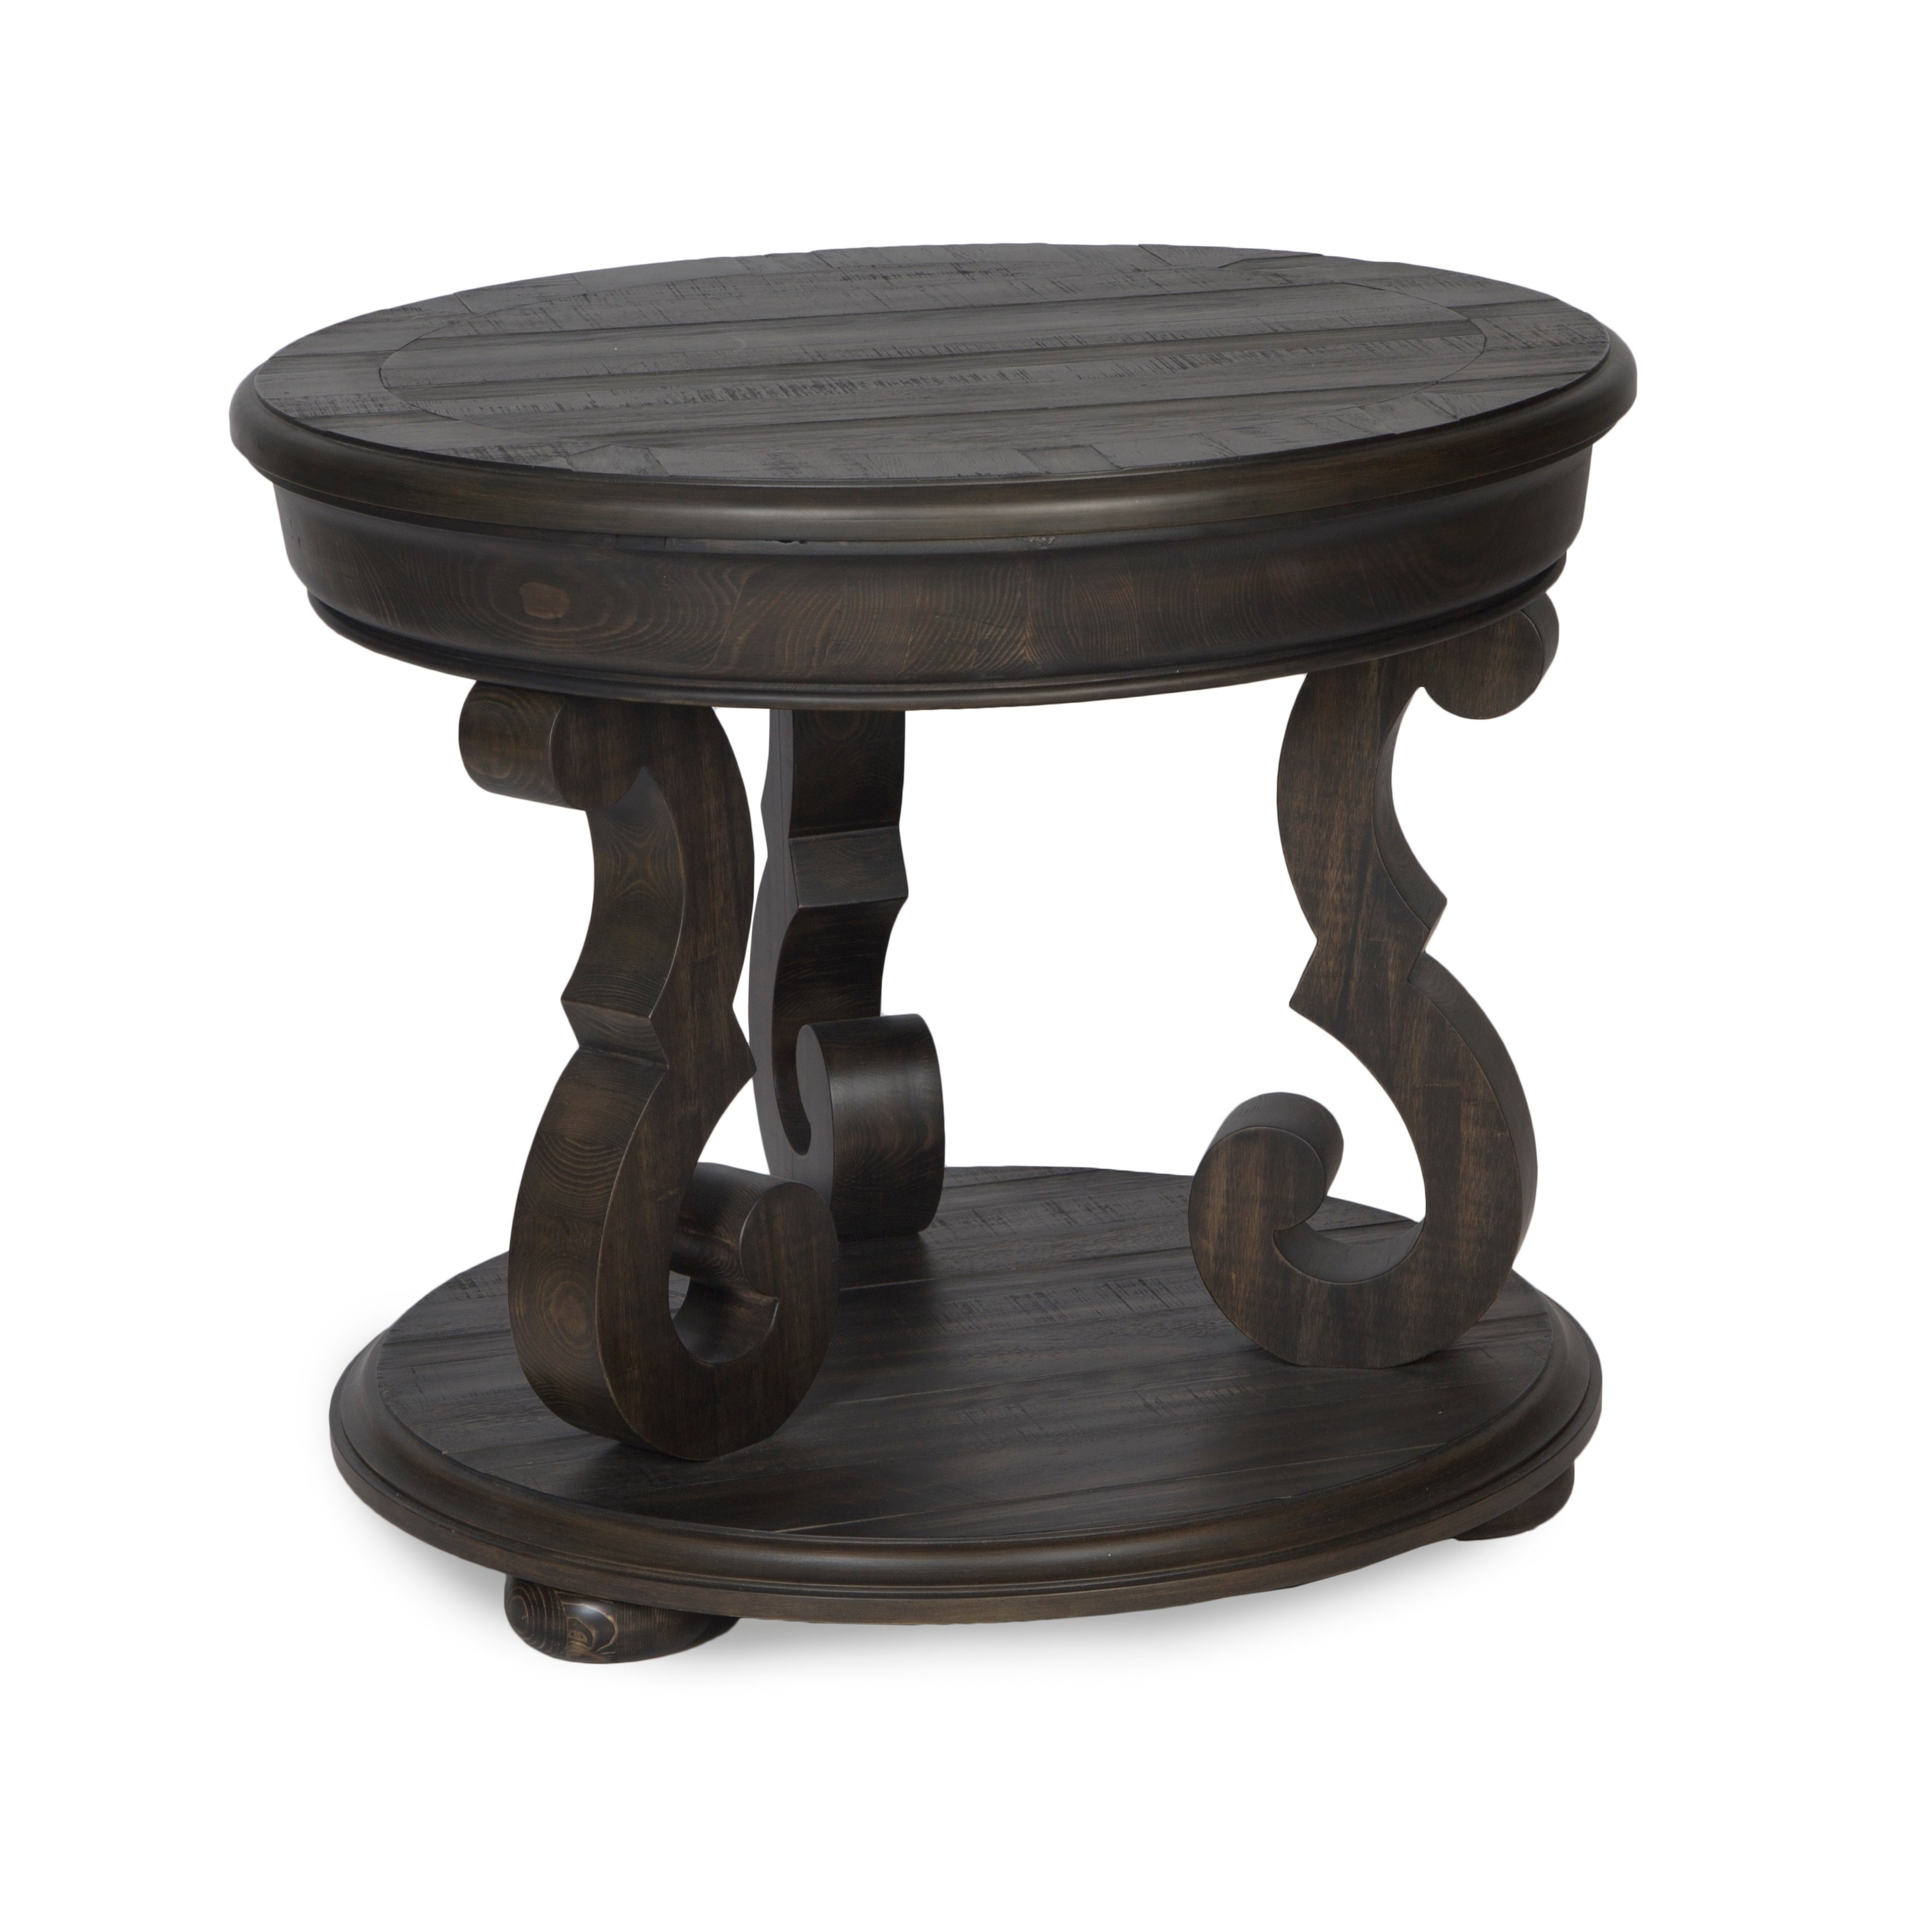 florence traditional distressed charcoal rustic round accent table free shipping today small wood coffee solid metal with marble top square side gray and white glass patio light